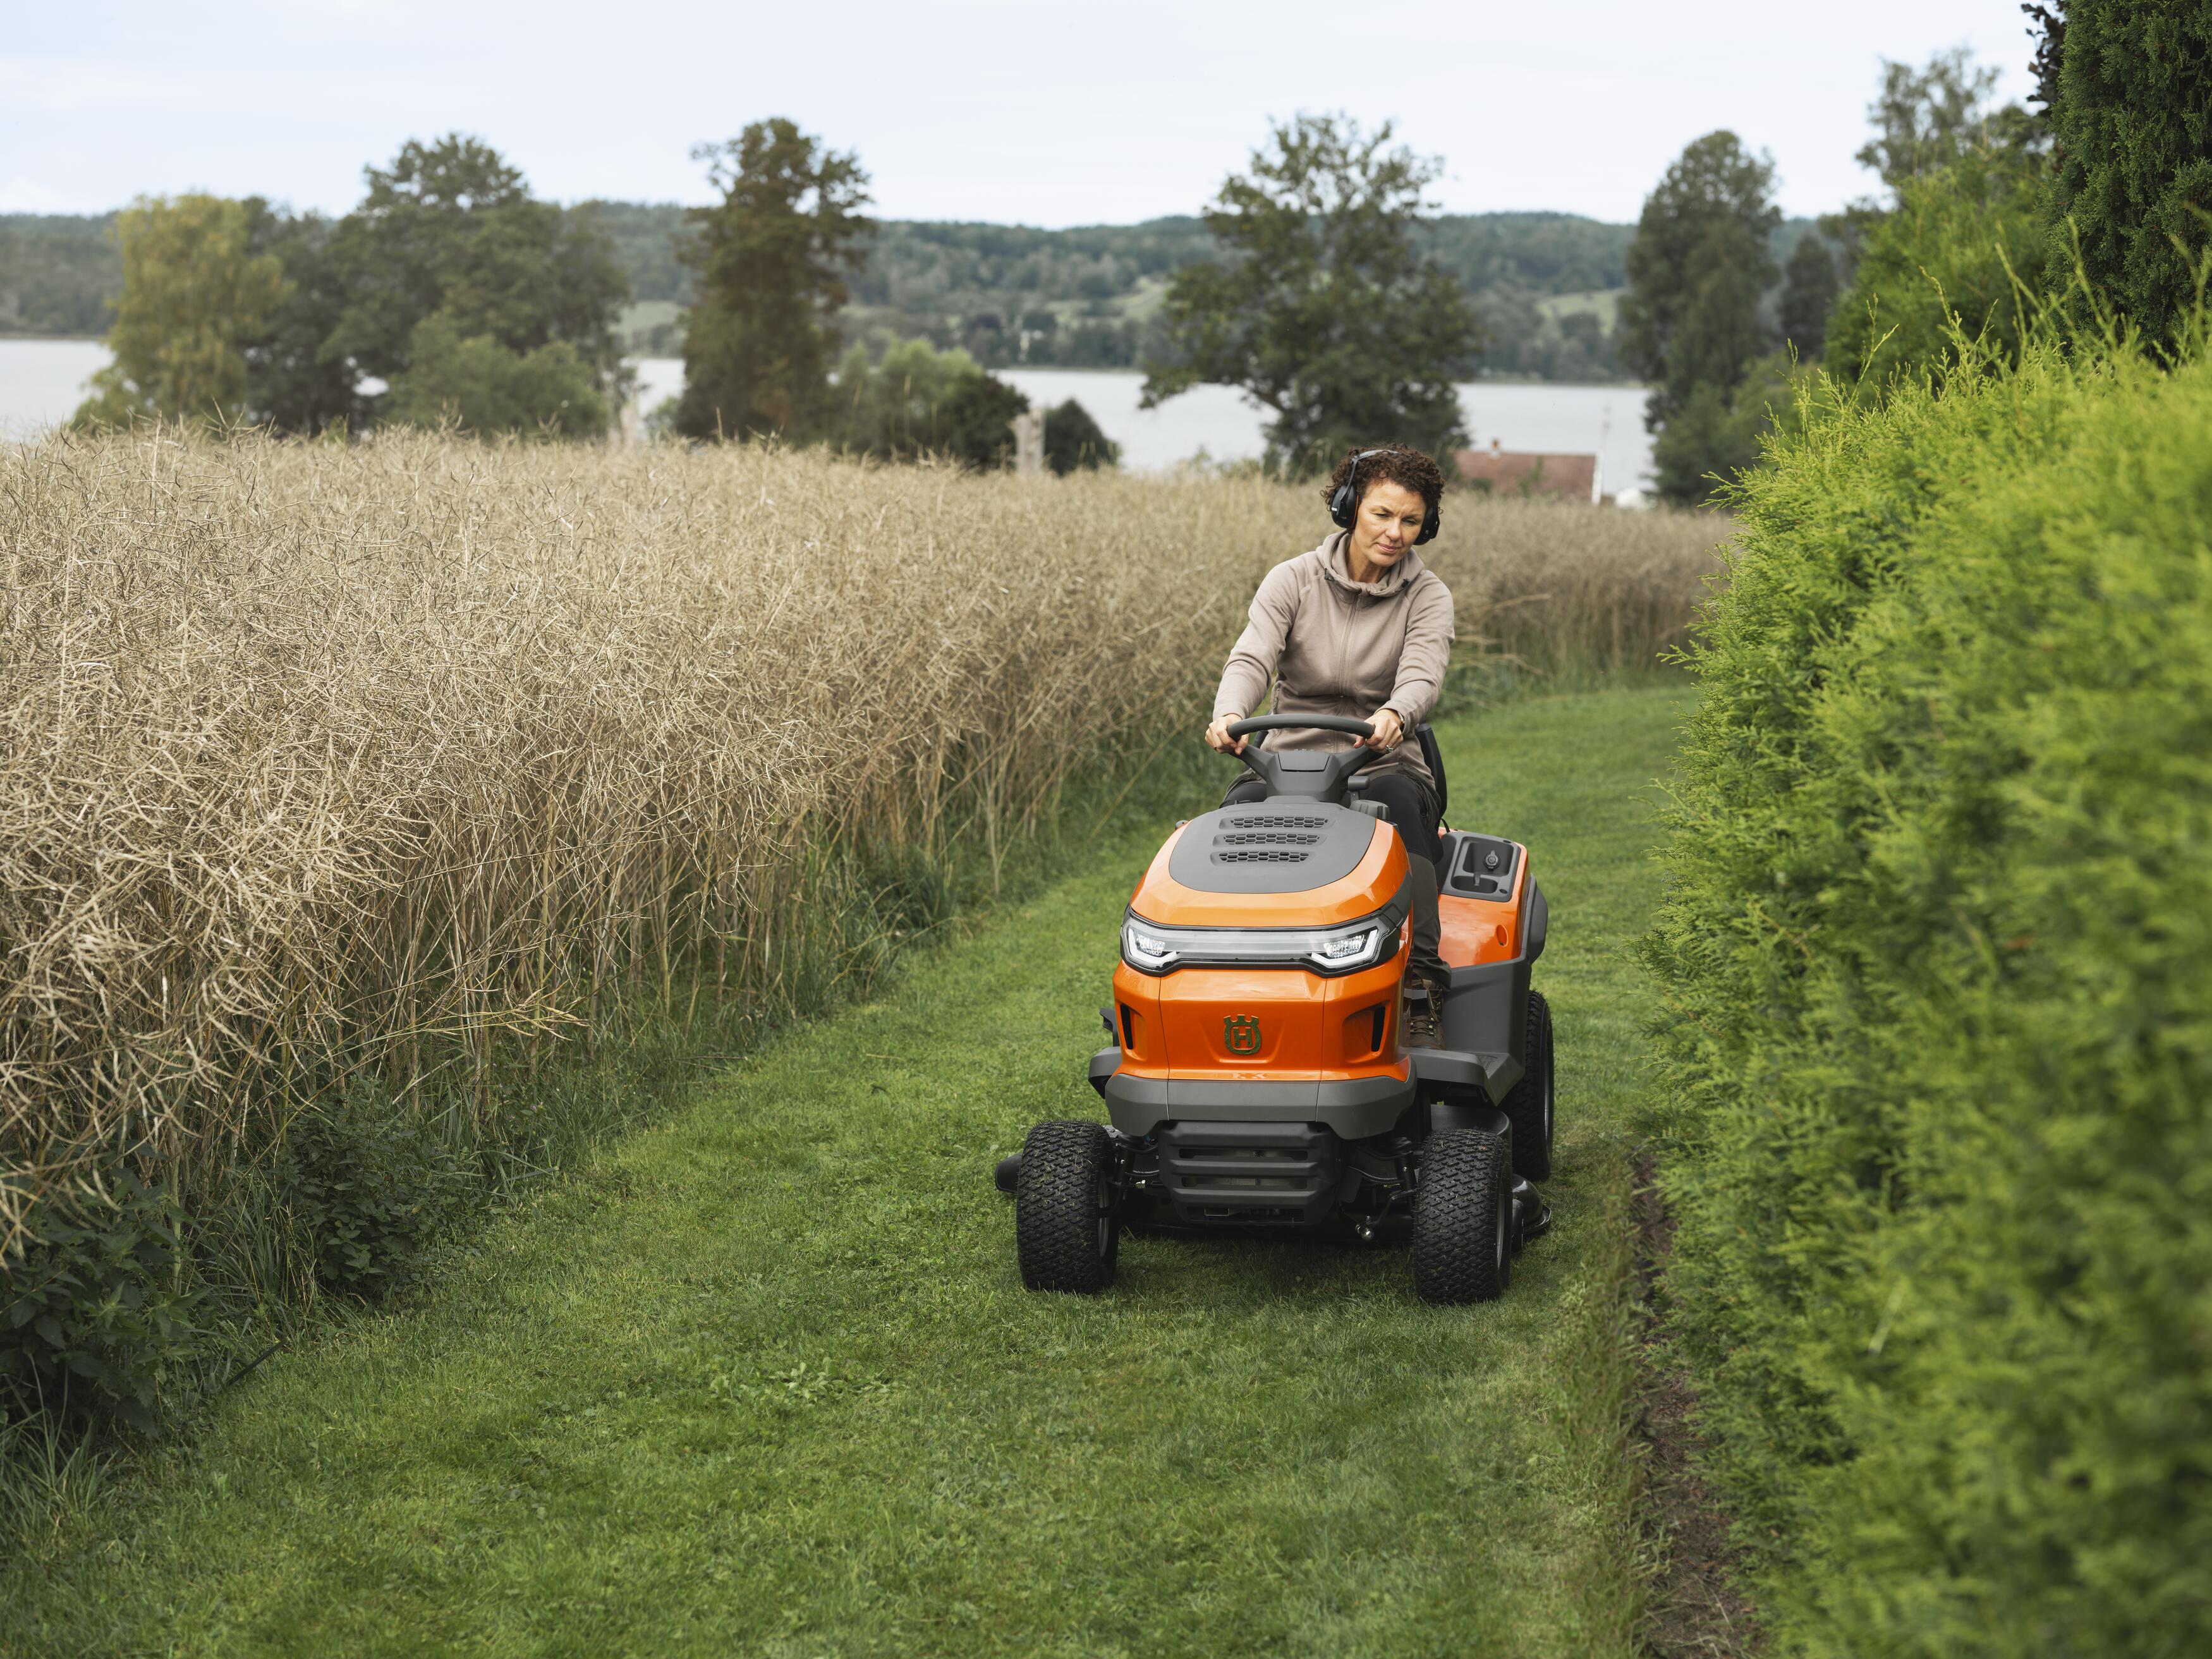 Mowing narrow passage with Garden tractor TS 215T